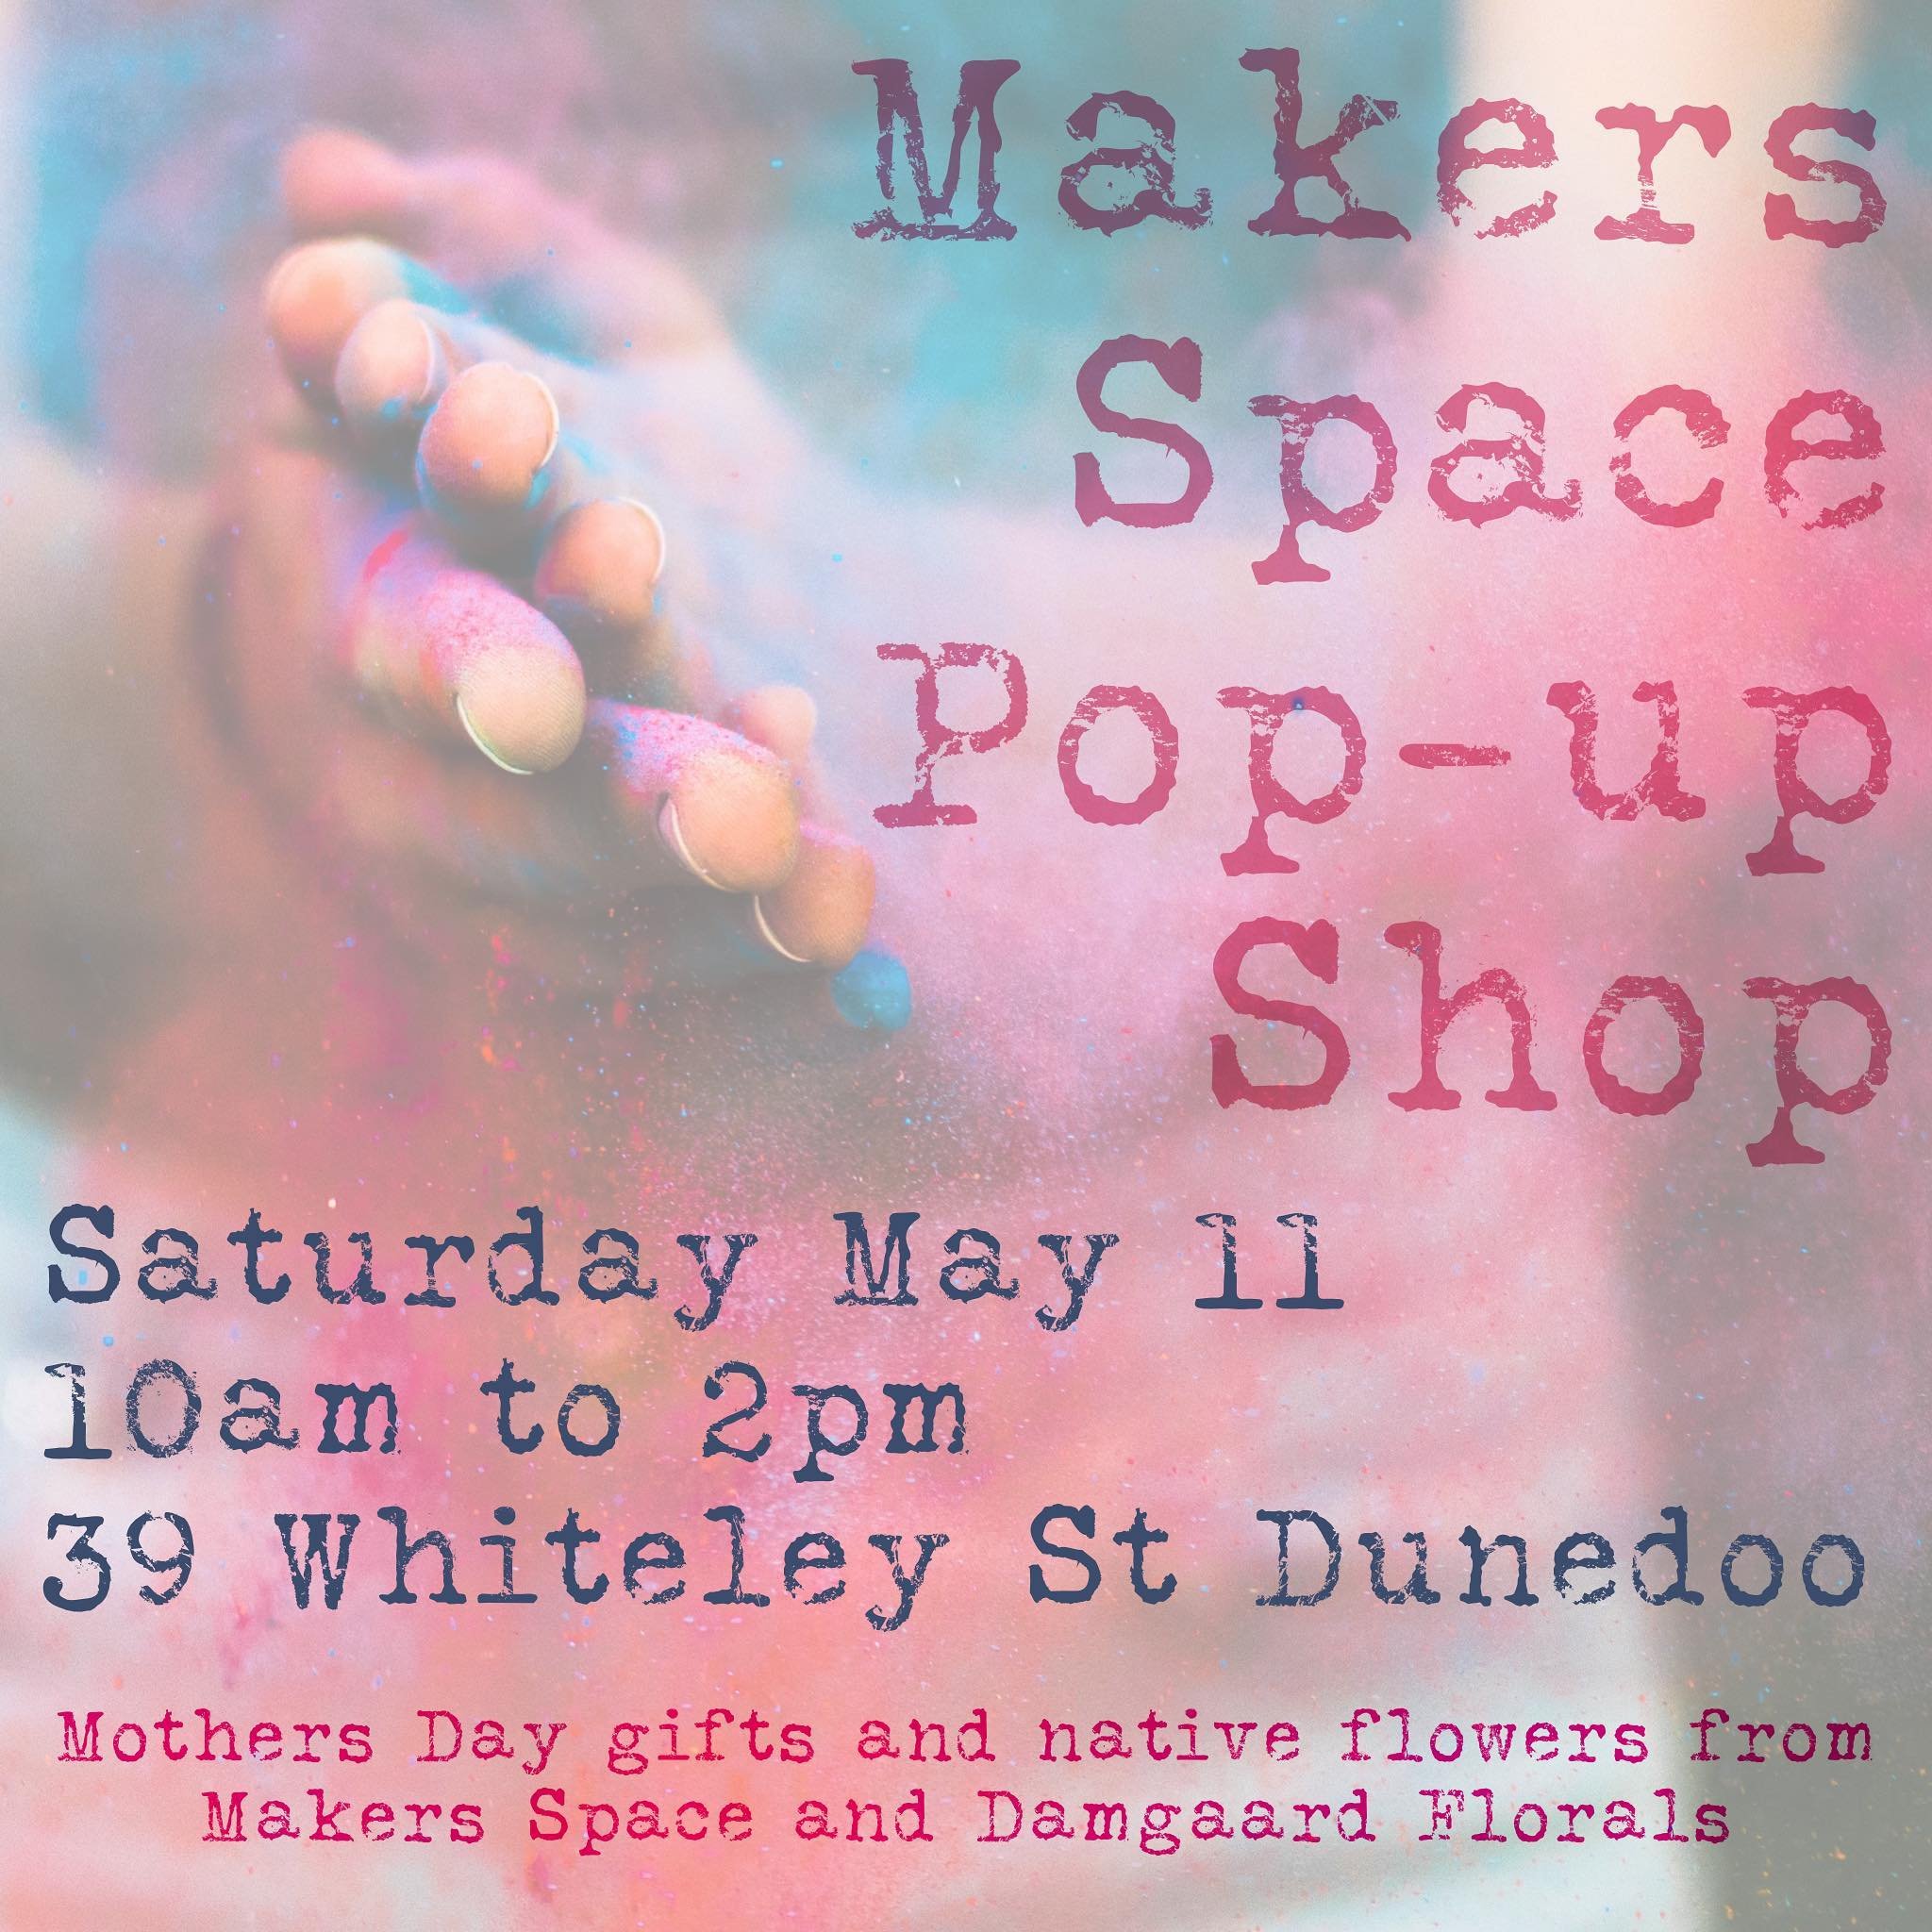 The Made &lsquo;n&rsquo; Grown Market is cancelled 😞 due to predicted rain ☔️ but you can still get a range of Mothers Day gifts and beautiful flowers at Makers Space Pop-up Shop, on Saturday. 

Anne will have handmade and artisan products for sale,